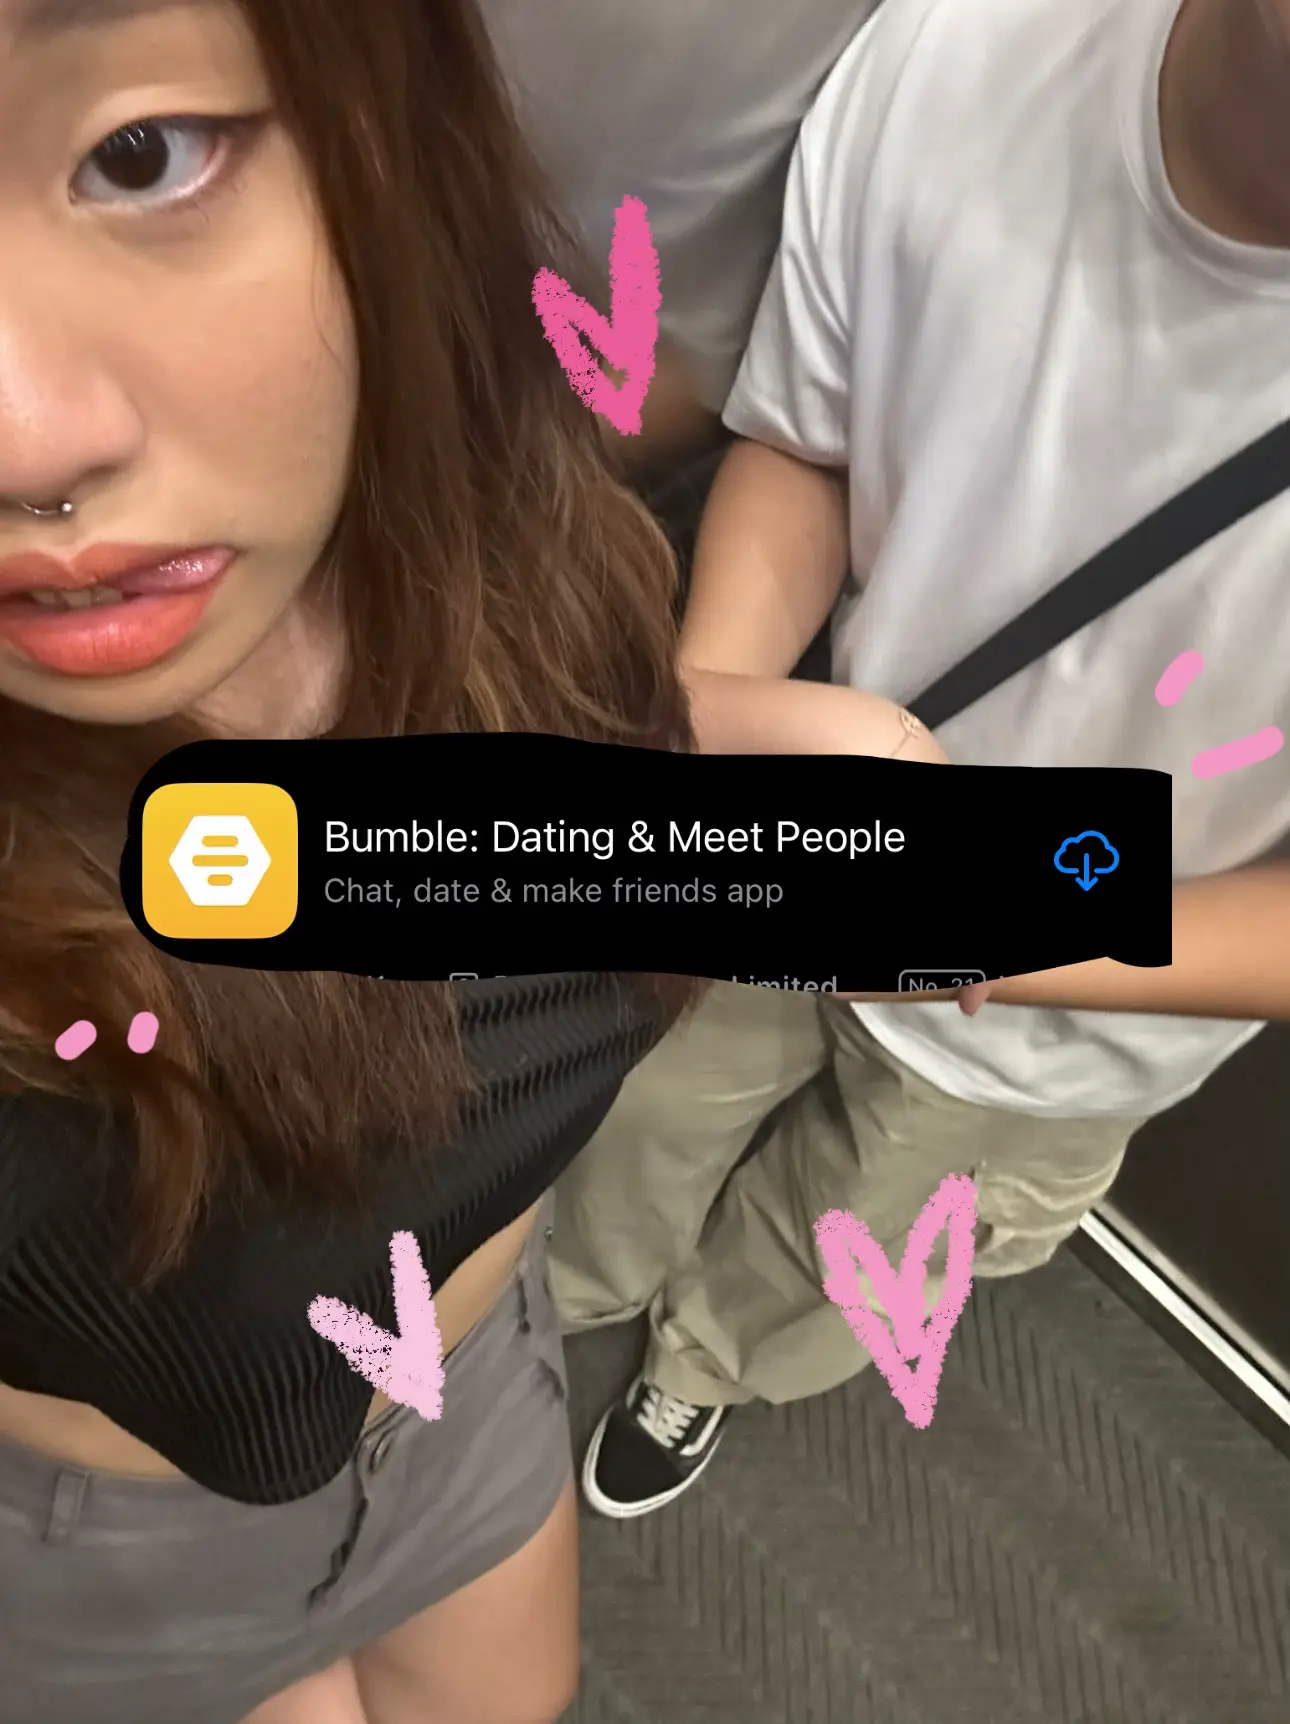 Finding love on dating apps ❤️'s images(0)